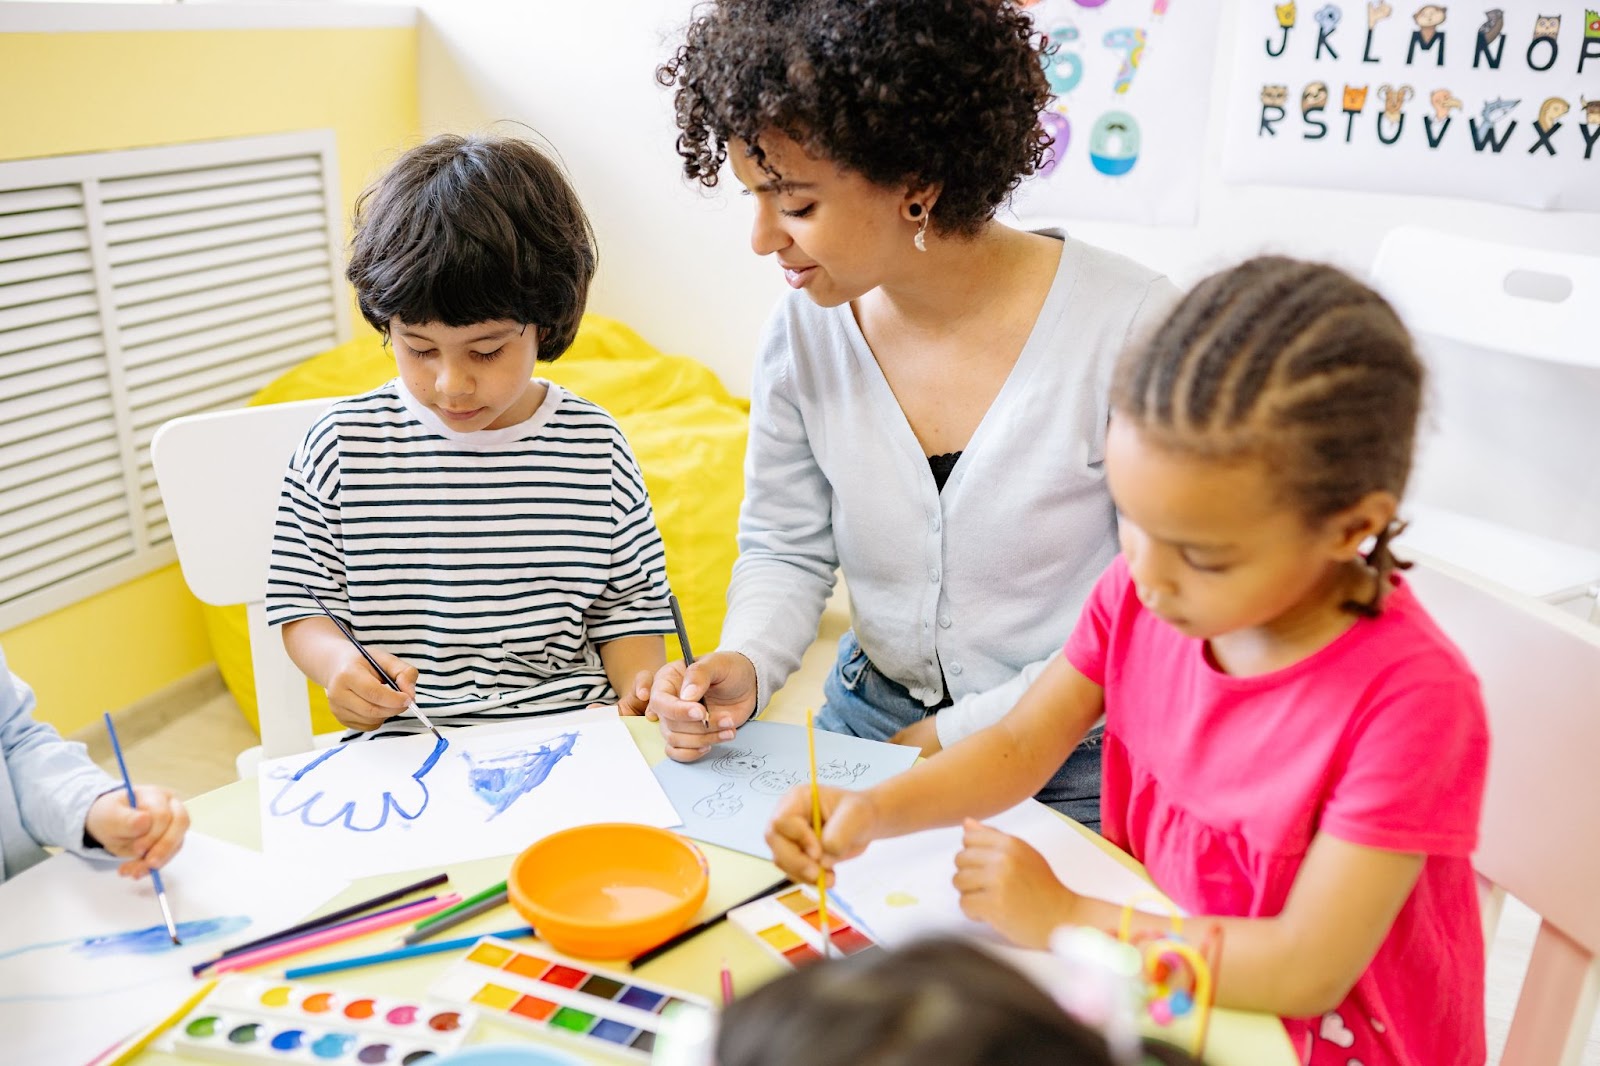 Arts and Crafts with Your Kids Fosters Creativity, Bonding, Fun